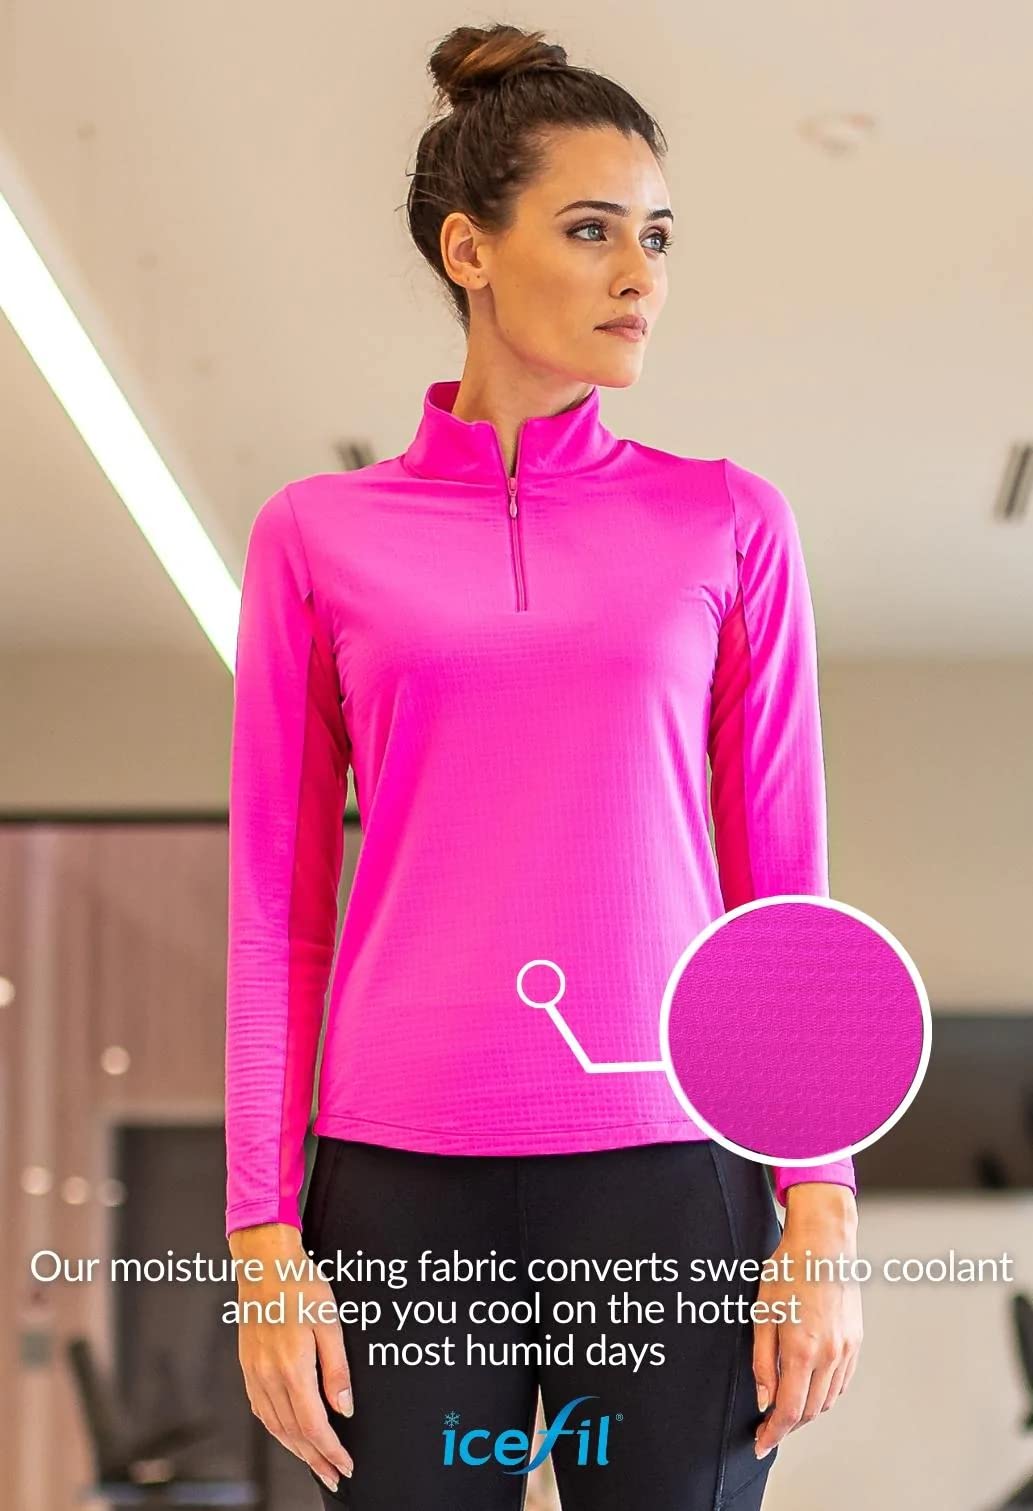 IBKUL Athleisure Wear Sun Protective UPF 50+ Icefil Cooling Tech Long Sleeve Mock Neck Top with Under Arm Mesh 80000 Plum Solid XL